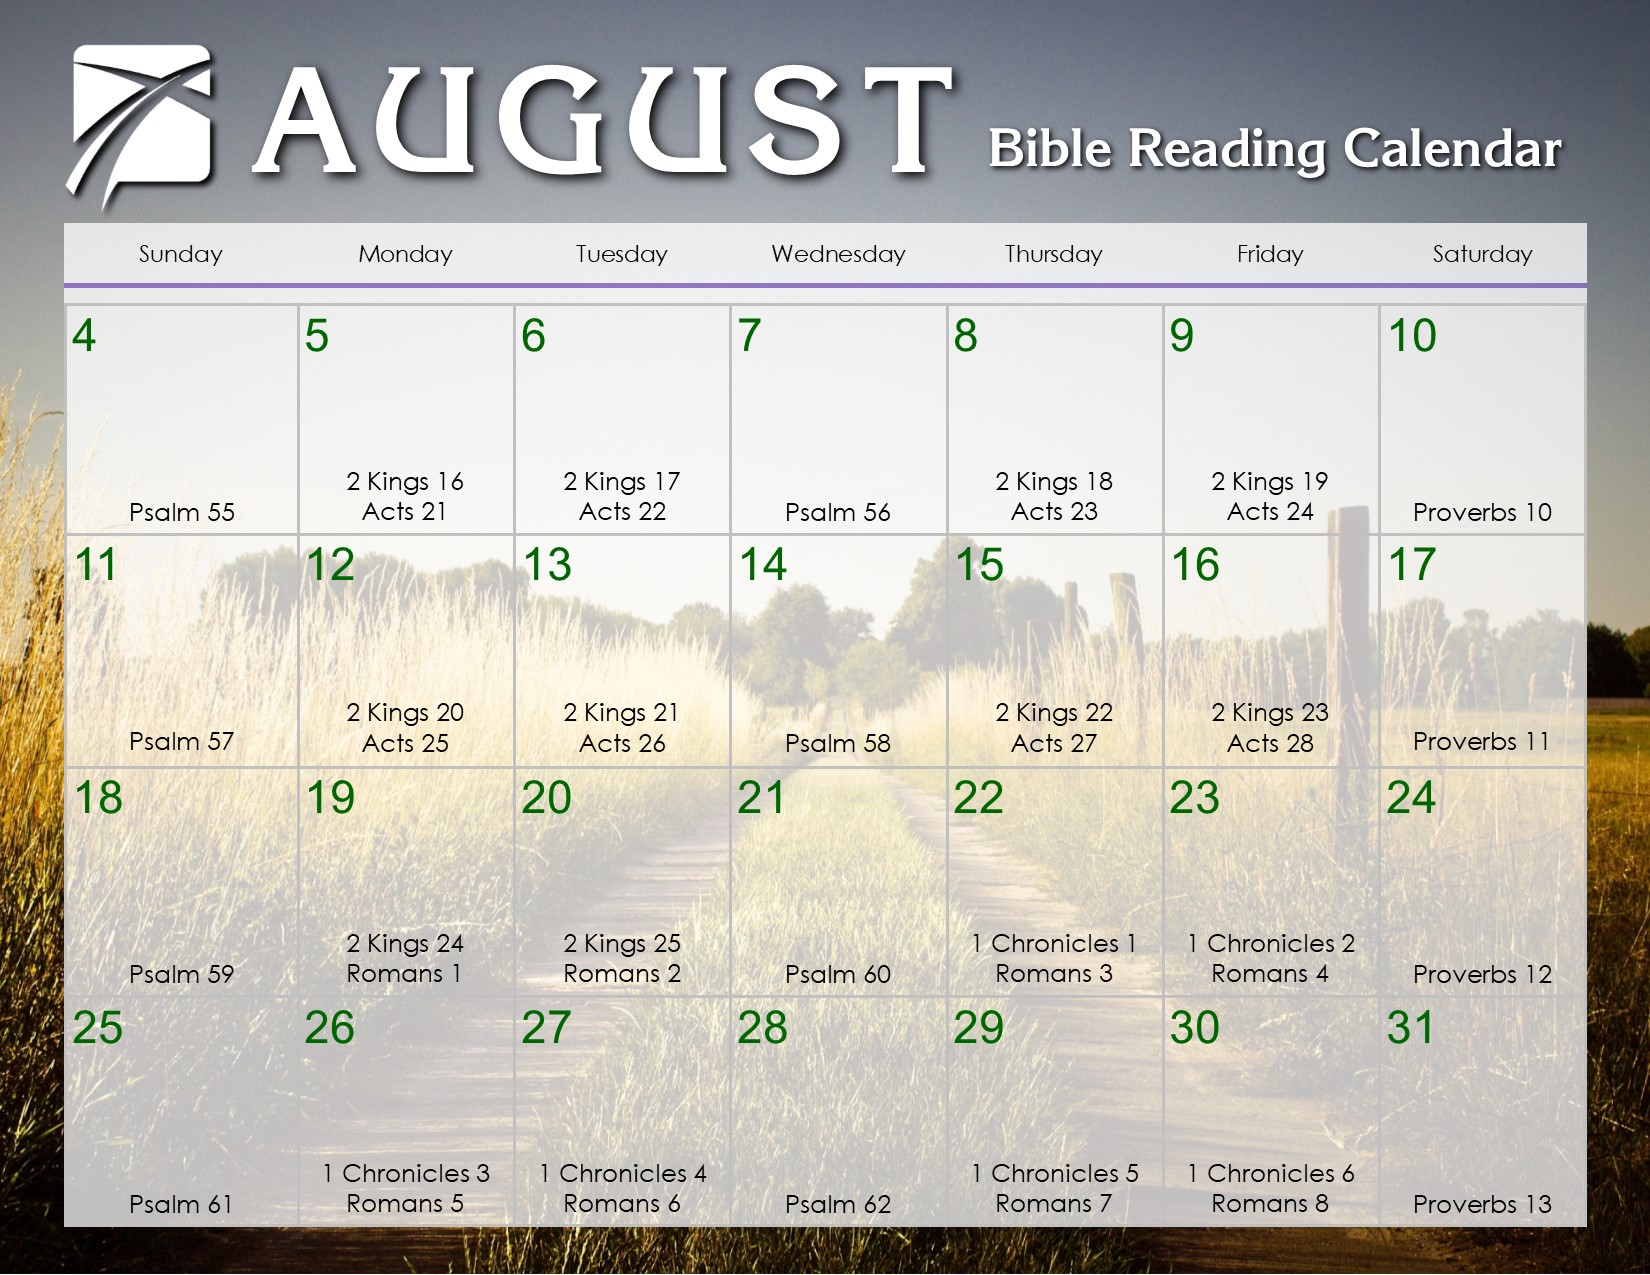 August 2019 Daily Bible Reading Calendar In God's Image